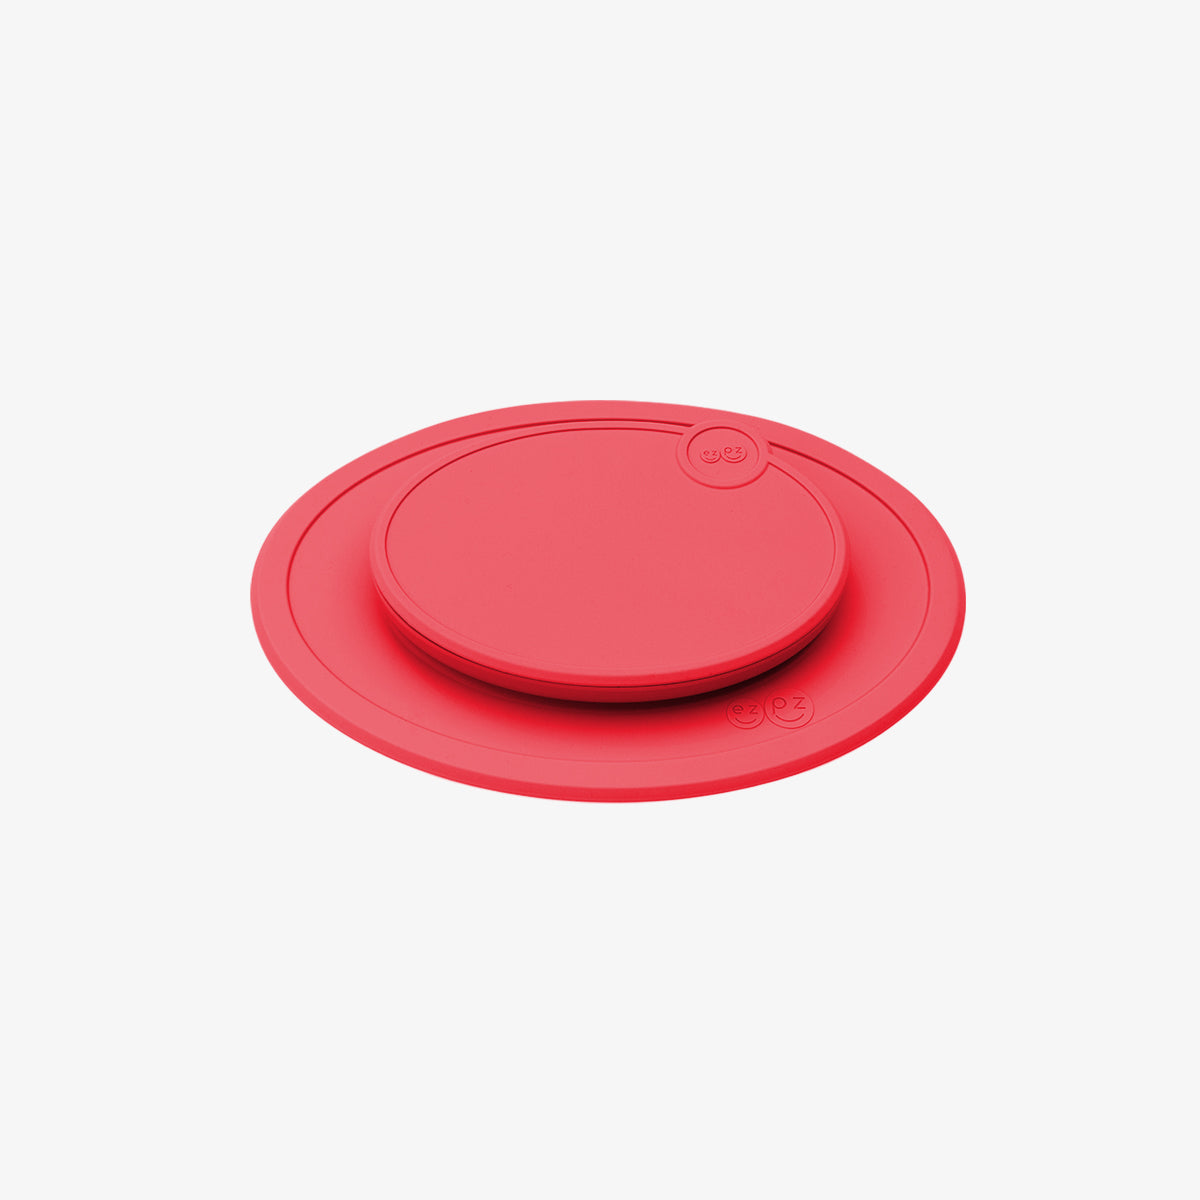 Mini Mat Lid in Coral / Storage Lids for the Mini Mat by ezpz / Silicone Lid for Toddler Plate